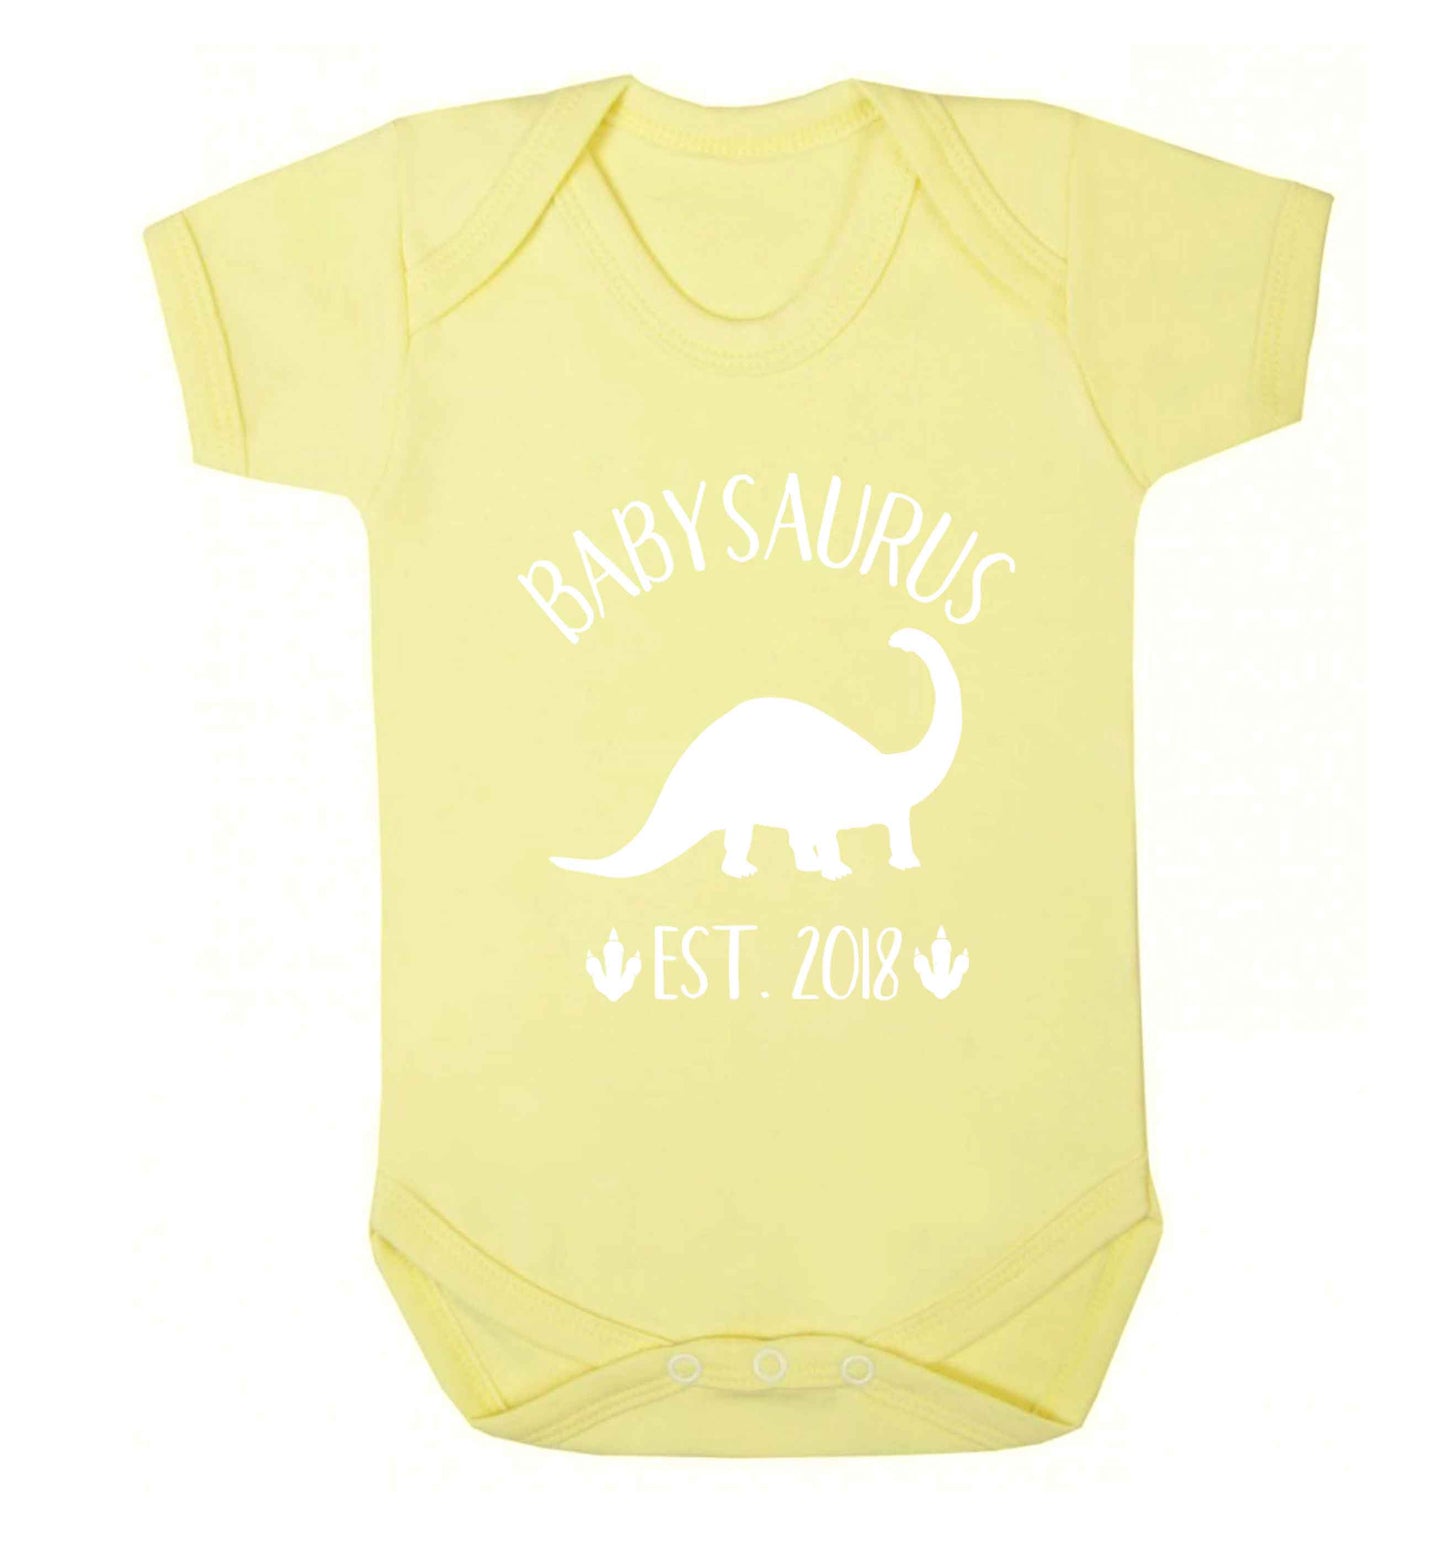 Personalised babysaurus since (custom date) Baby Vest pale yellow 18-24 months